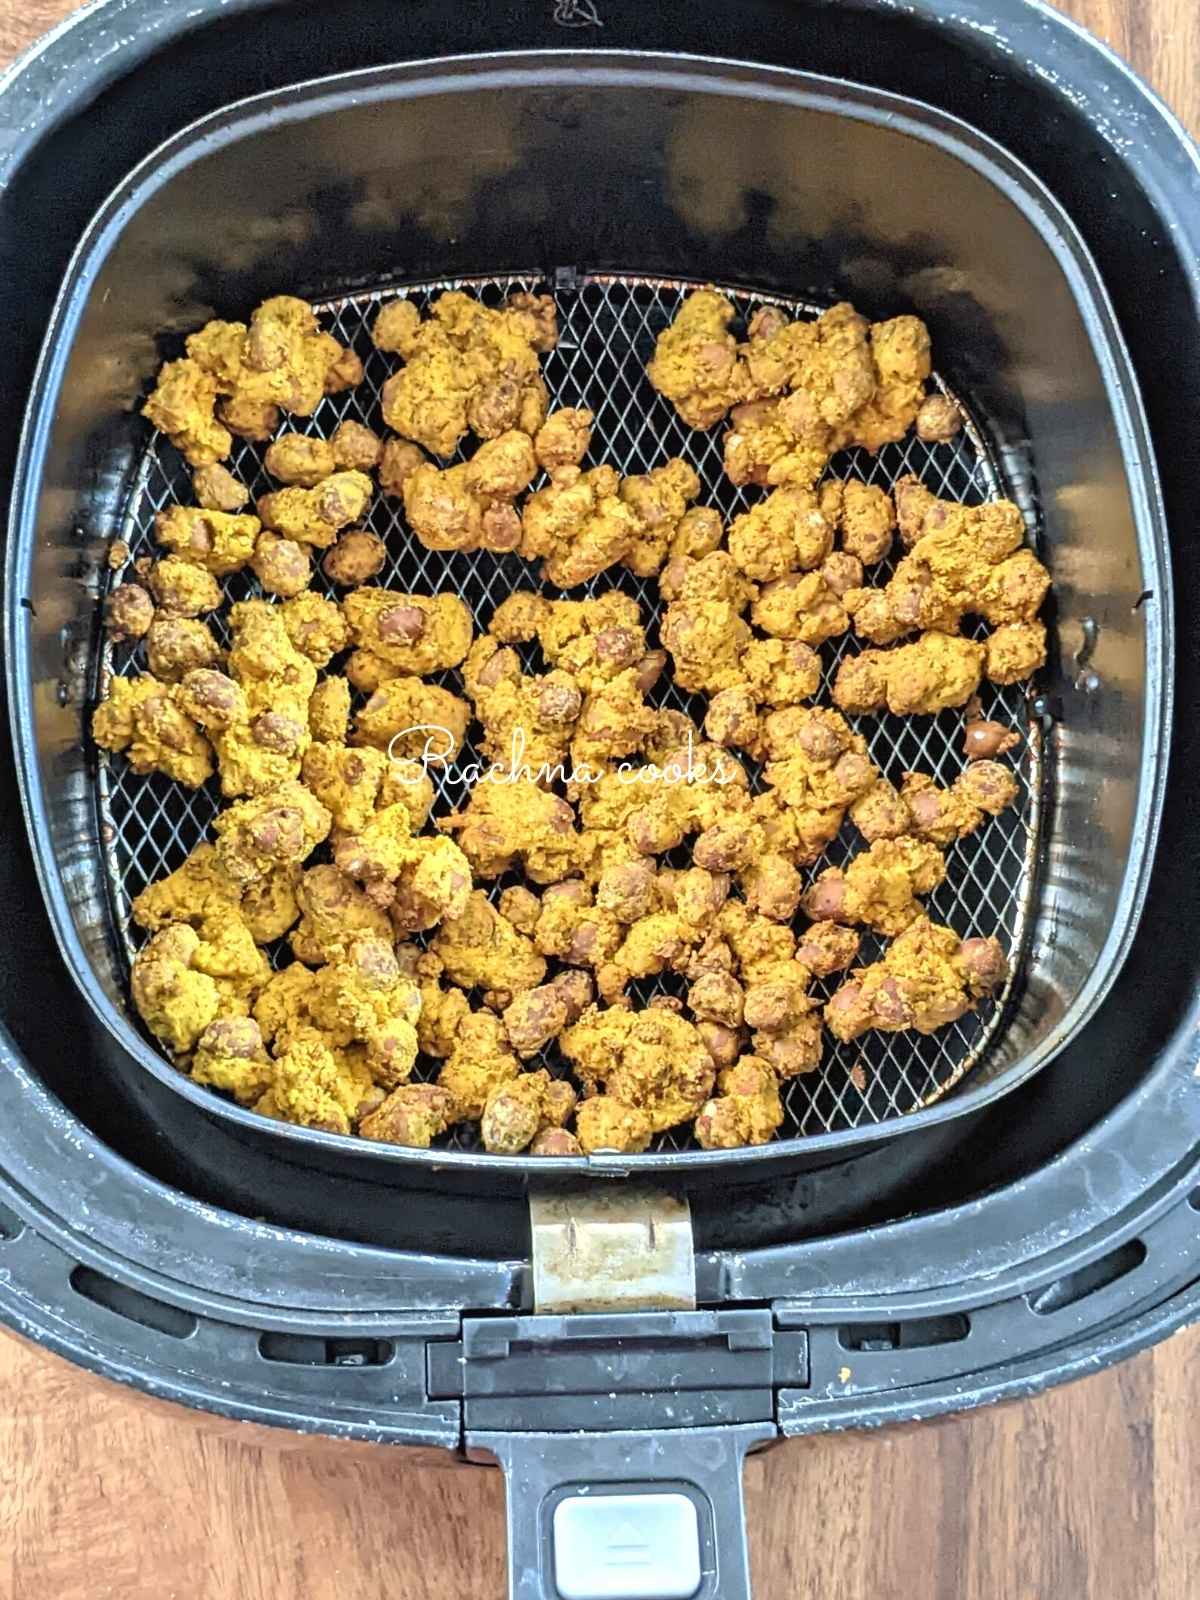 Coated masala peanuts done after air frying placed in air fryer basket.